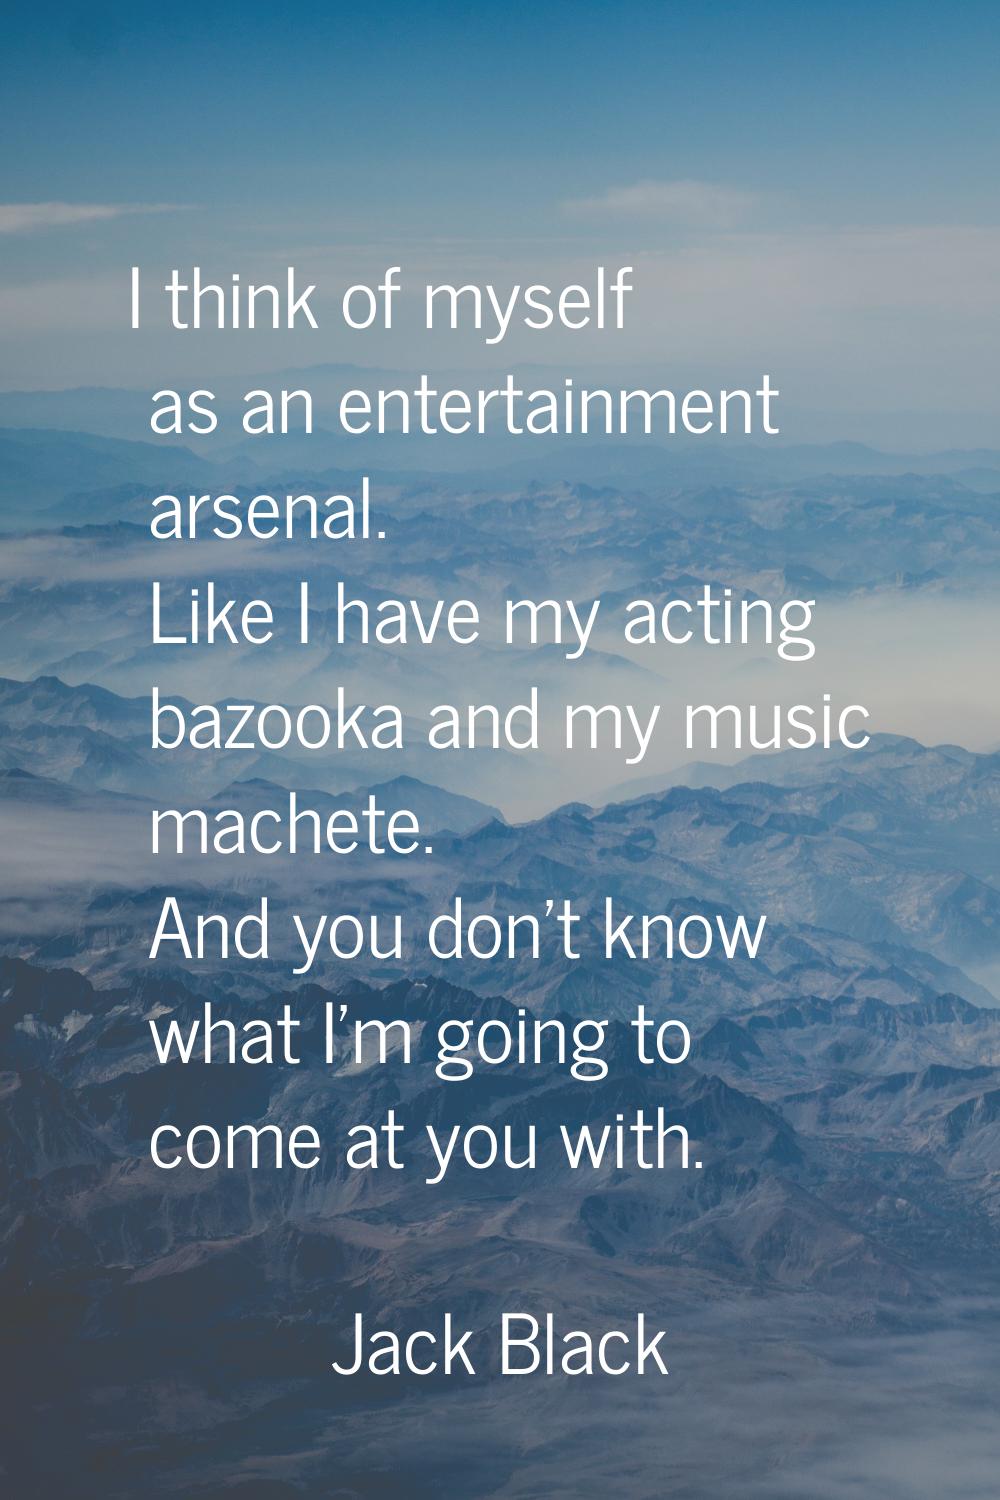 I think of myself as an entertainment arsenal. Like I have my acting bazooka and my music machete. 